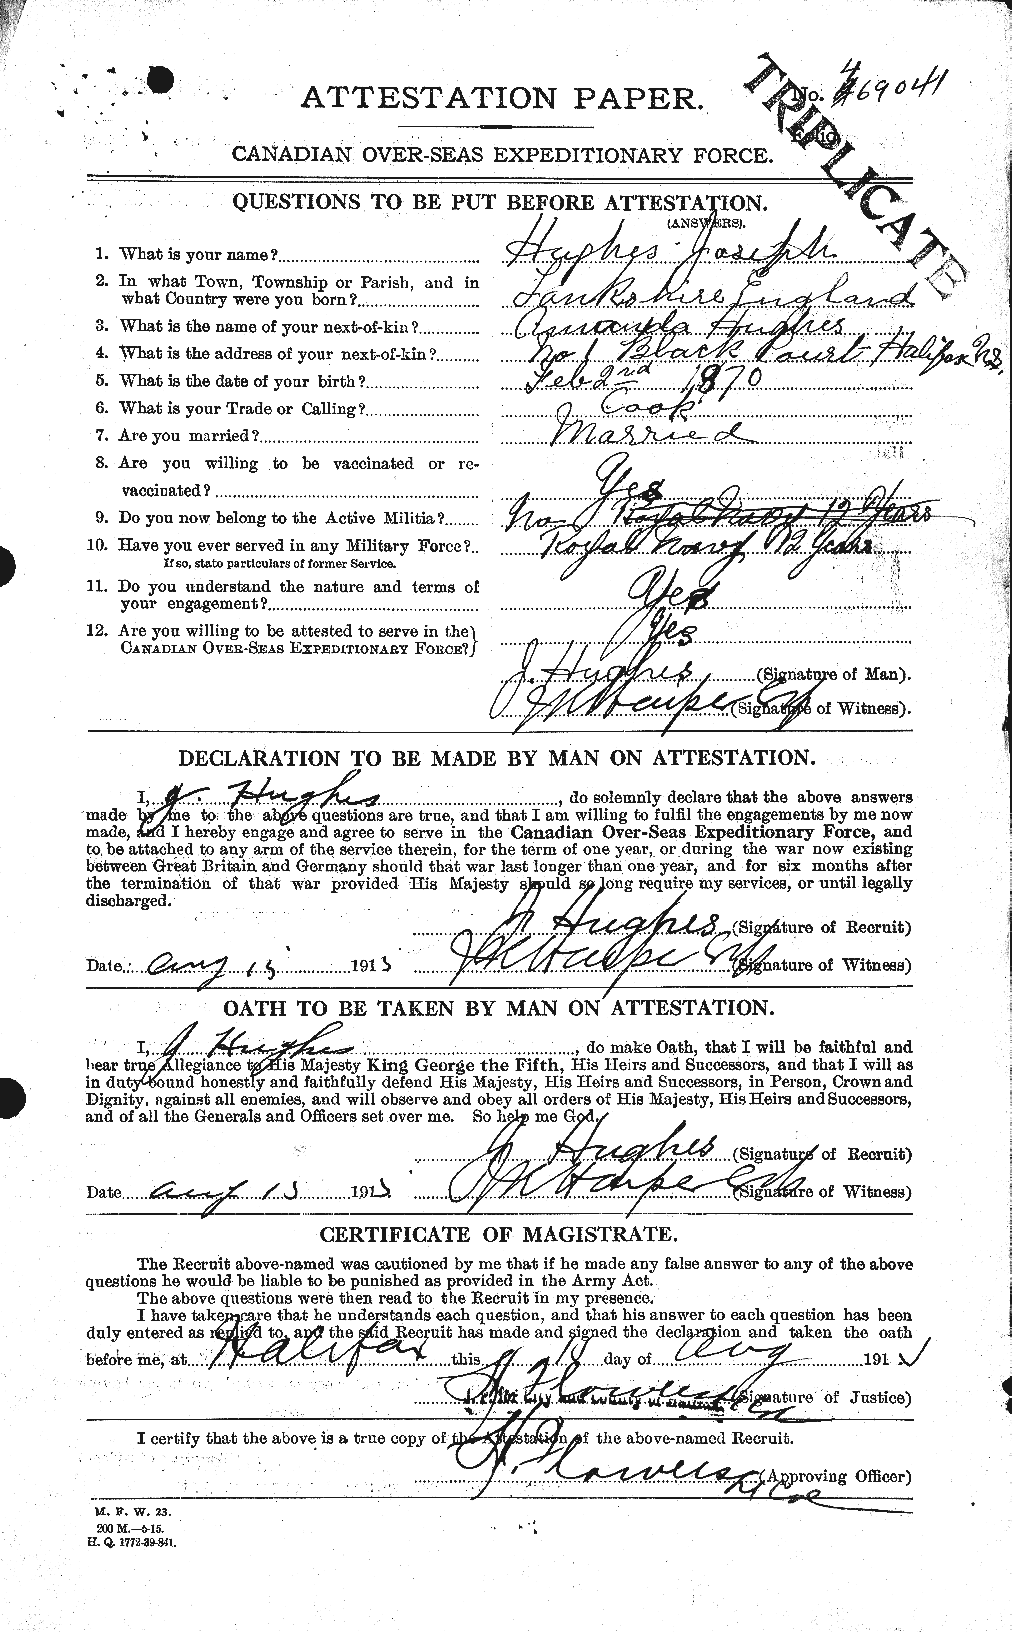 Personnel Records of the First World War - CEF 404076a